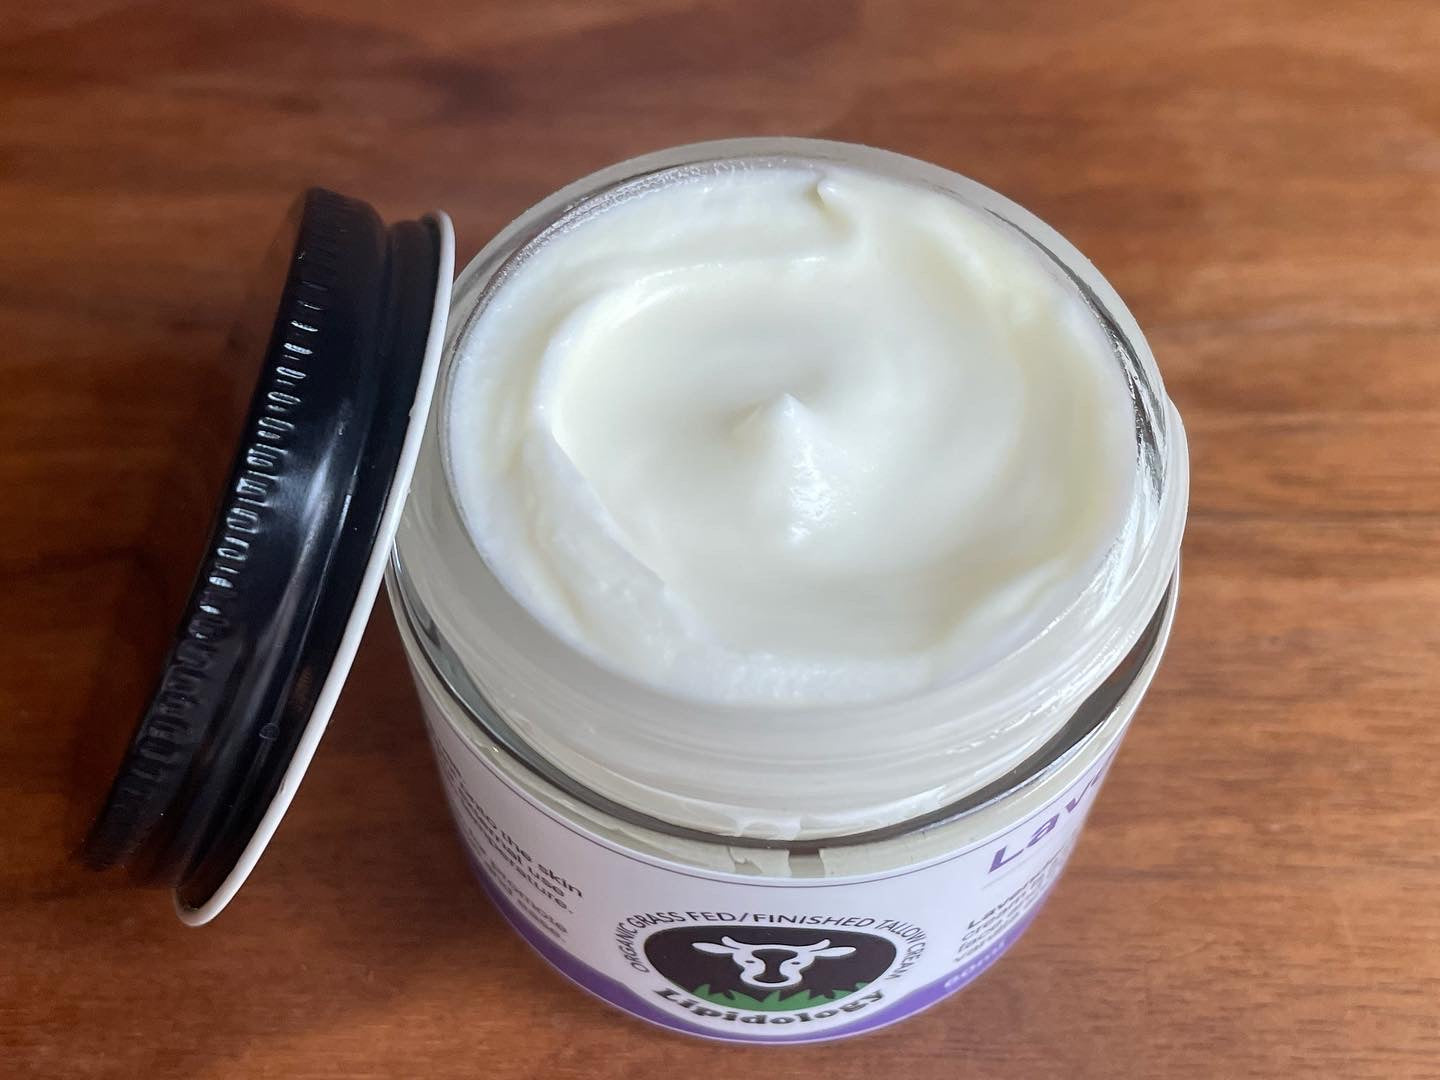 Lavender Love, Face and Body Cream Vanilla and Lavender Organic Grass-Fed Tallow 60 ml